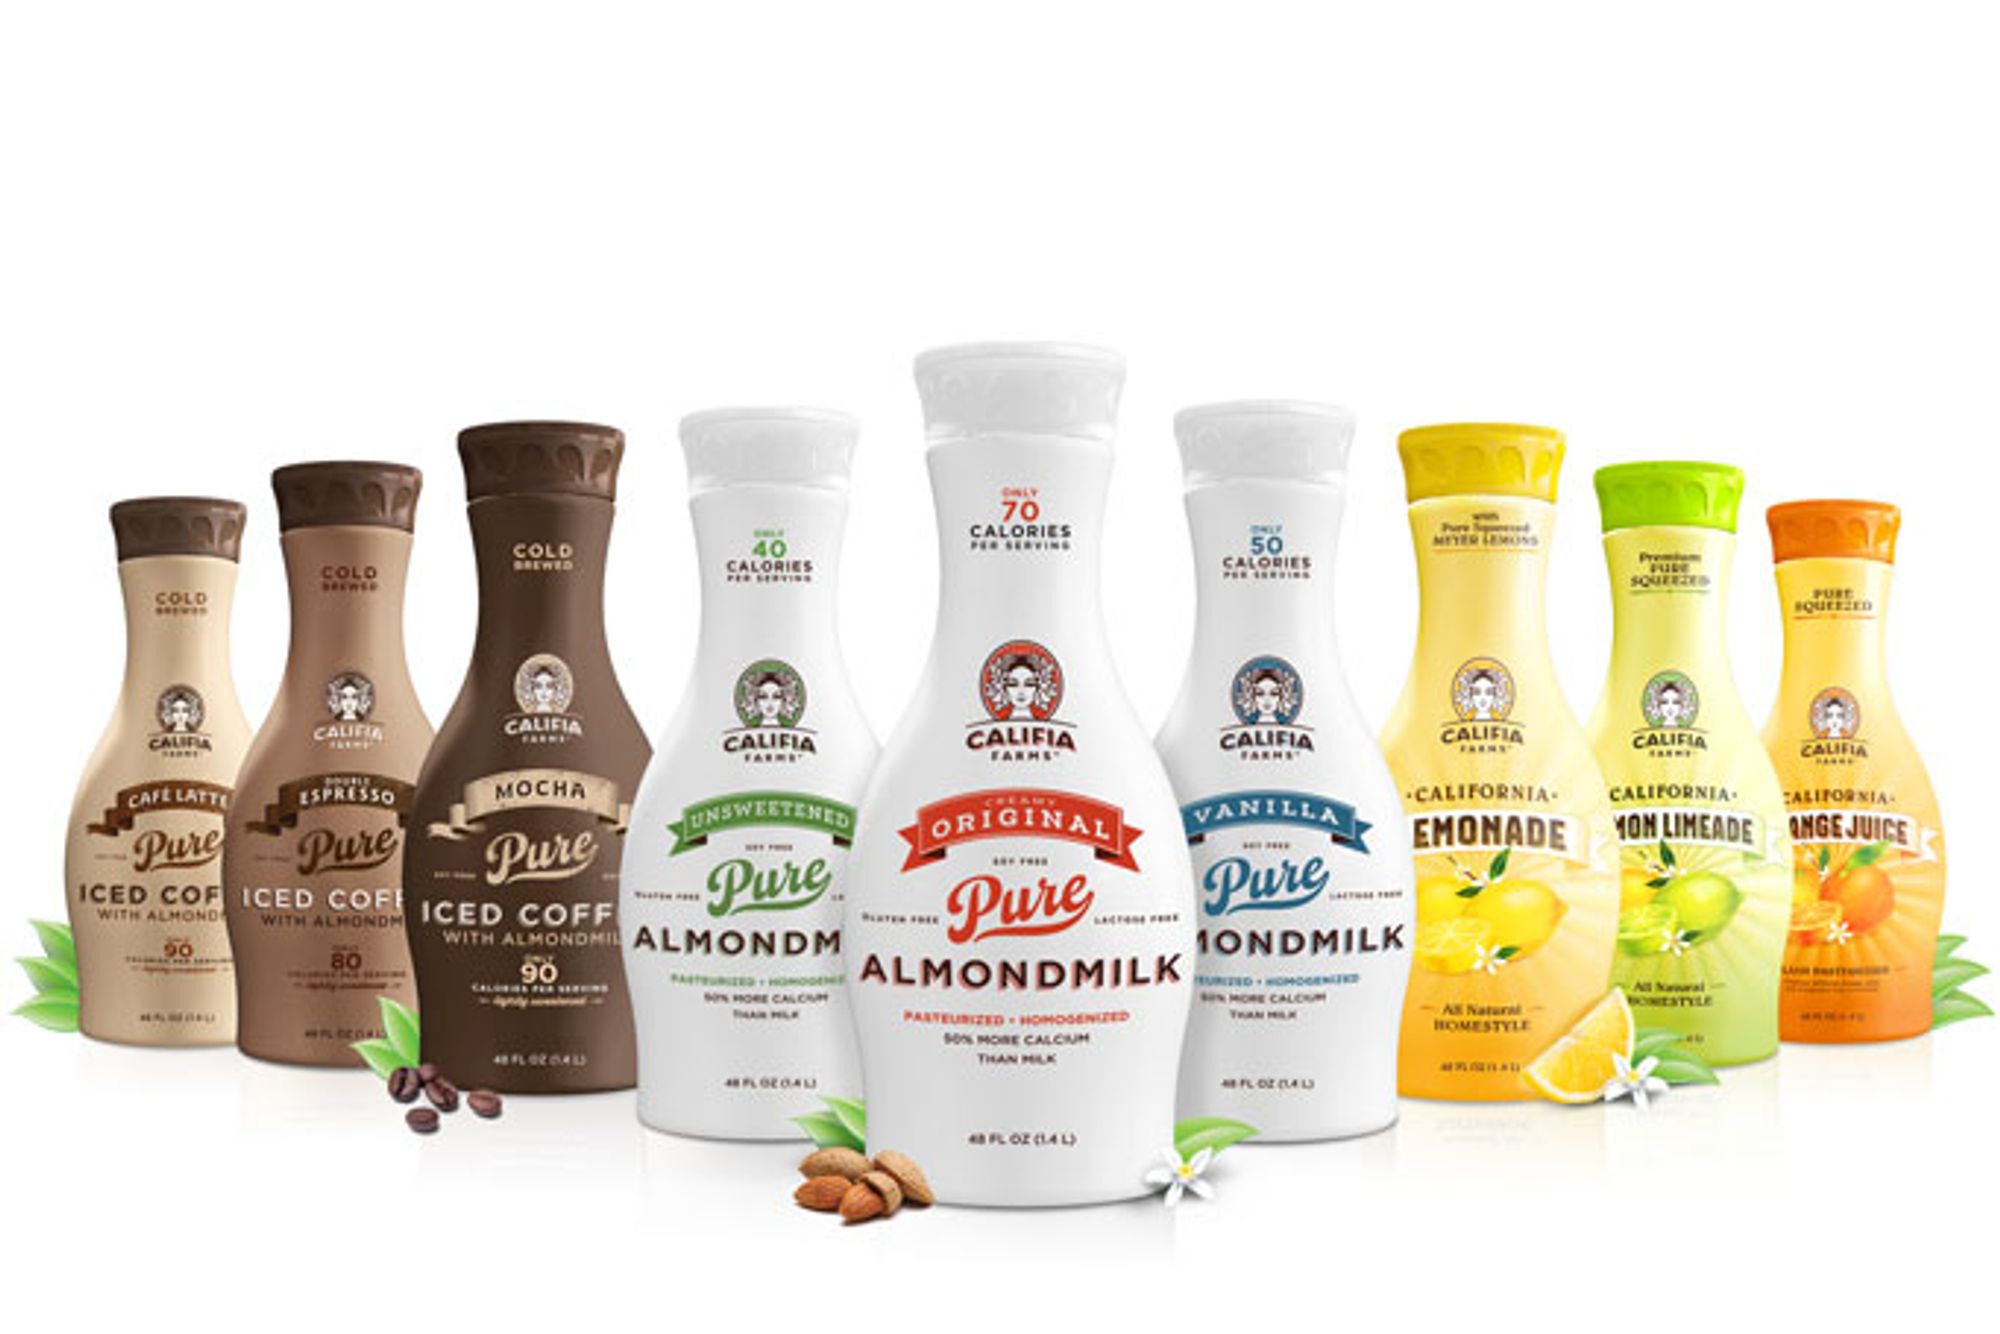 Califia lineup of products 